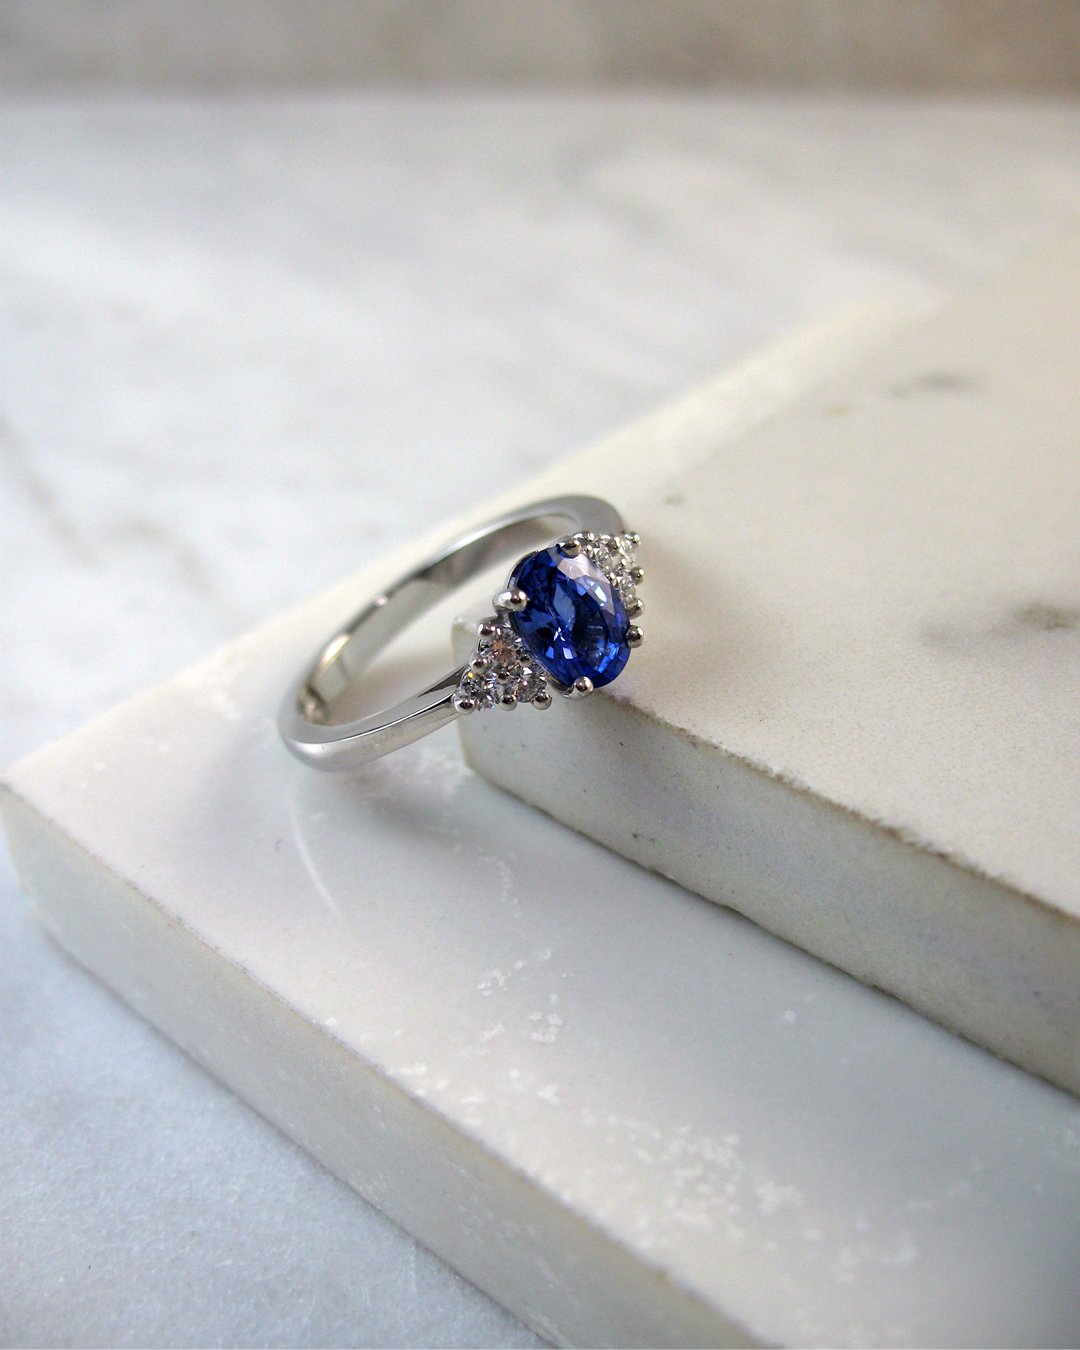 A stunning diamond and sapphire engagement ring in our trefoil design